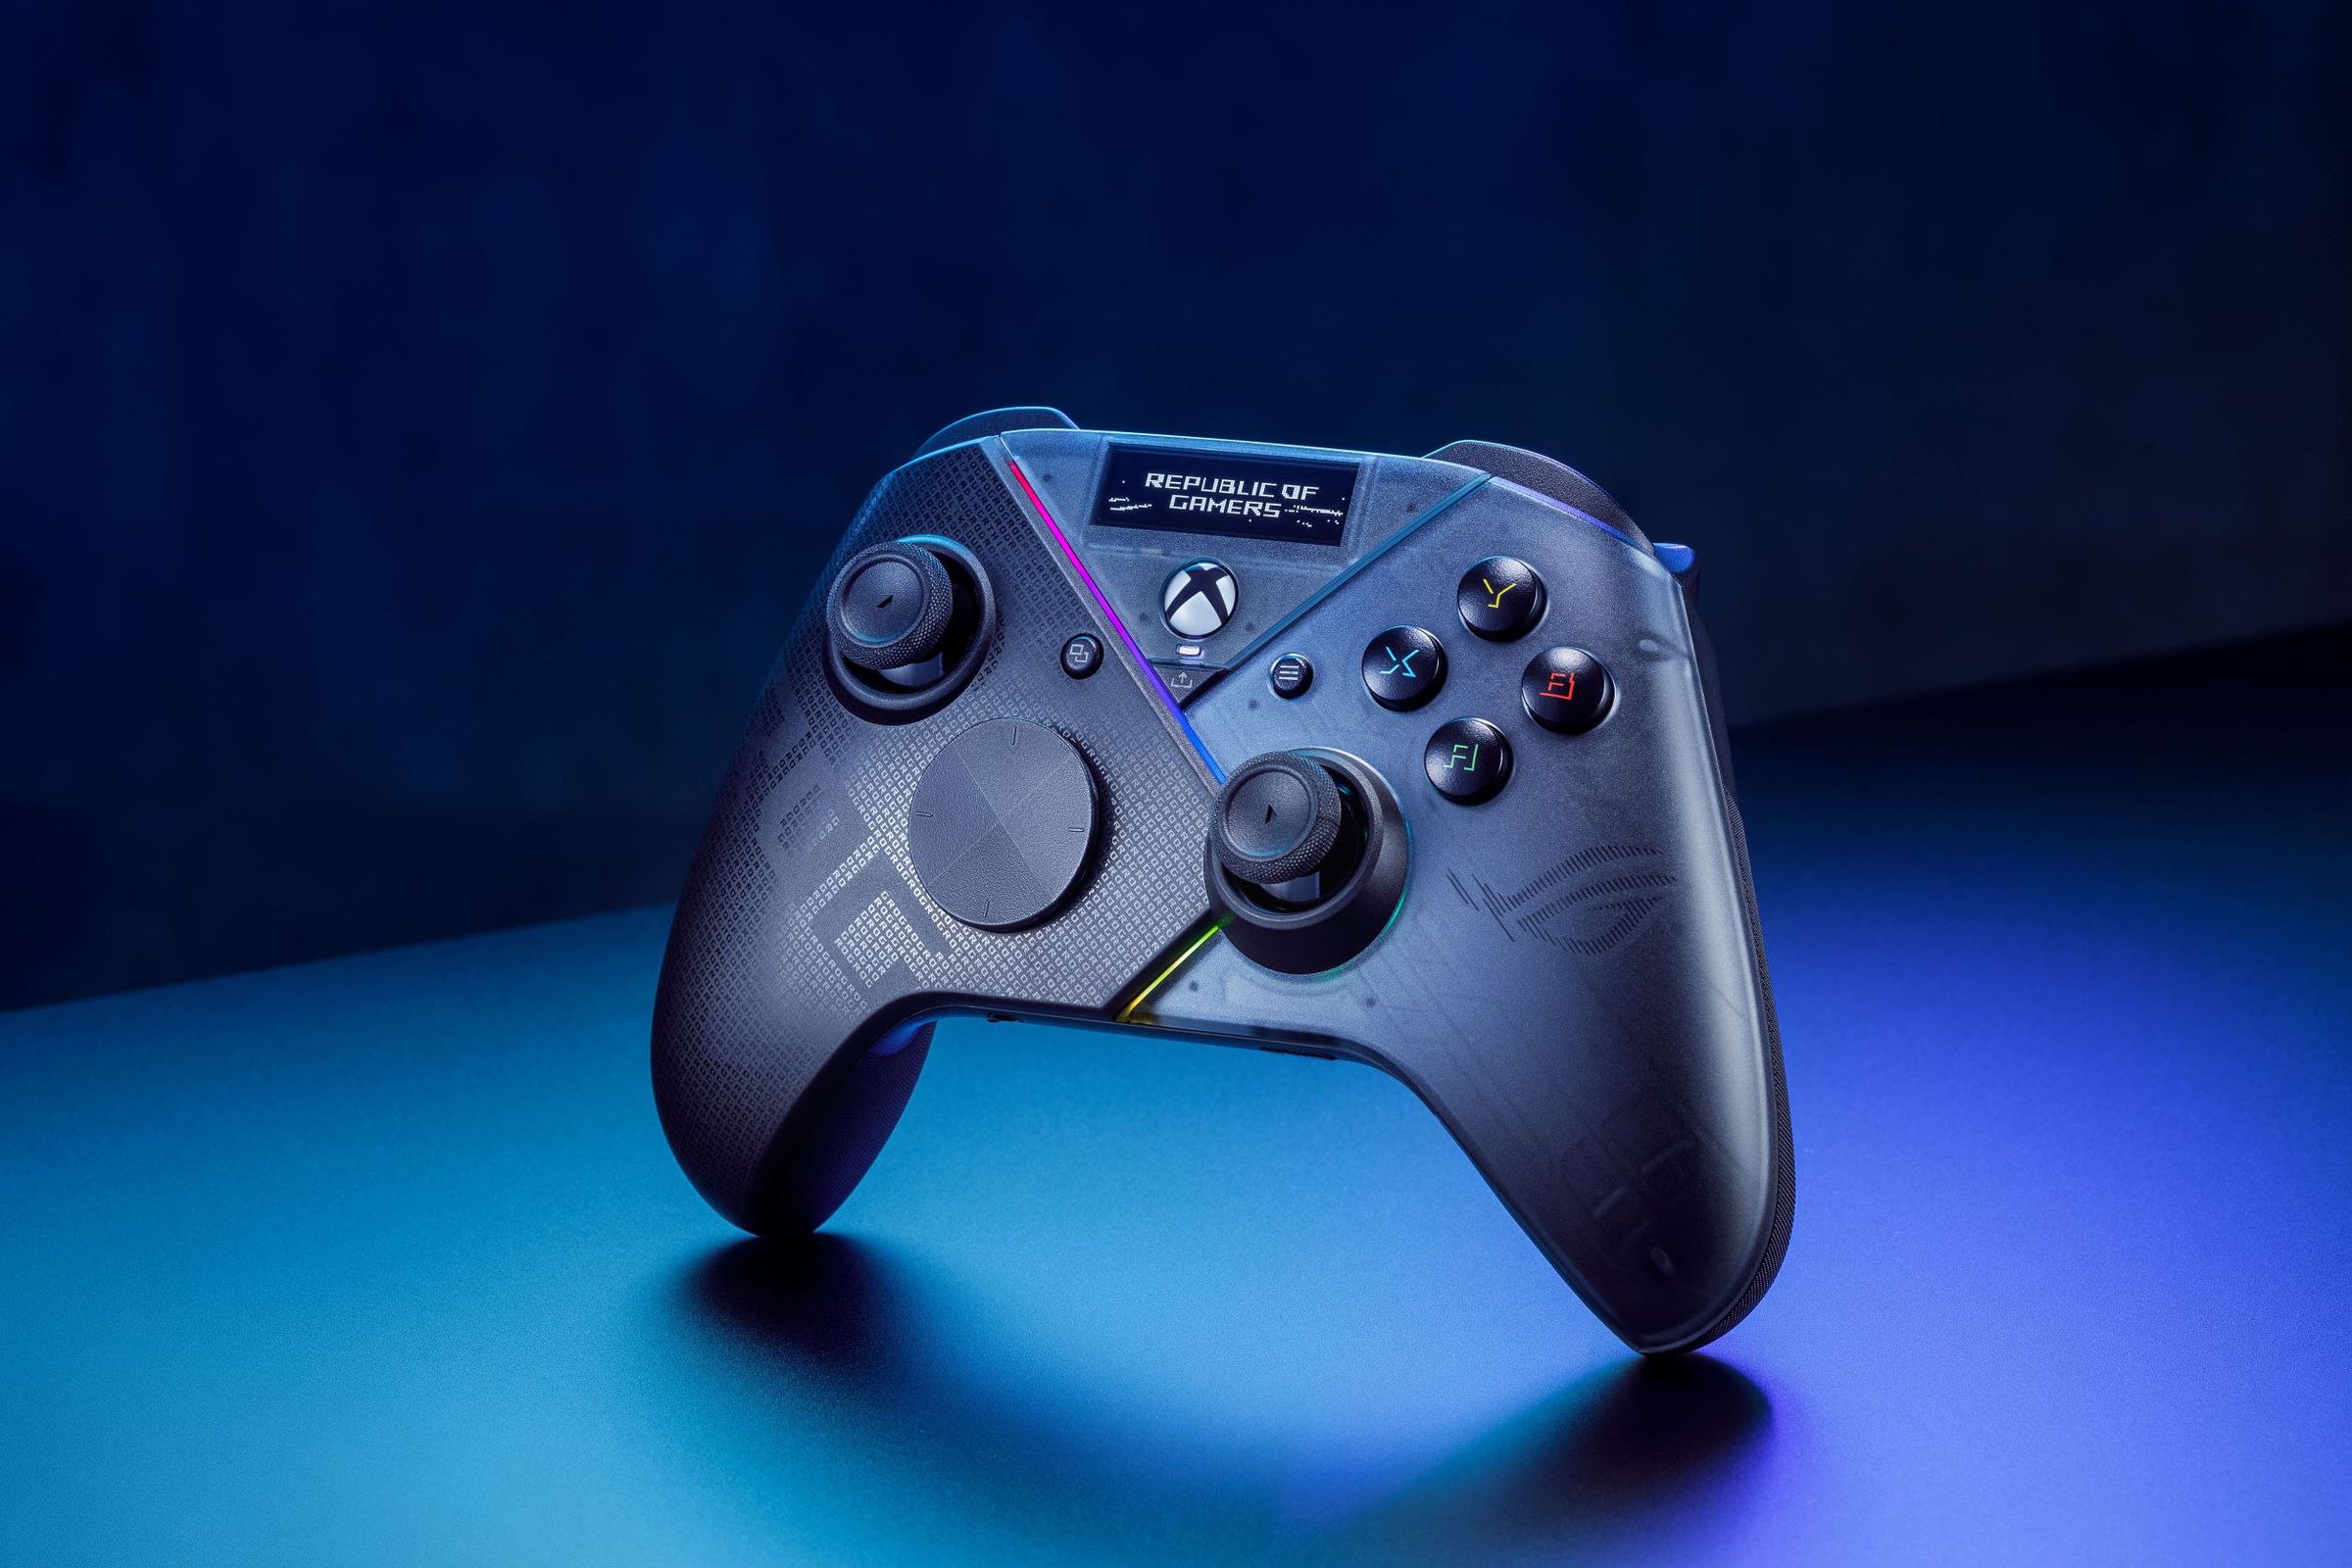 Asus’ new Xbox controller with a built-in OLED display